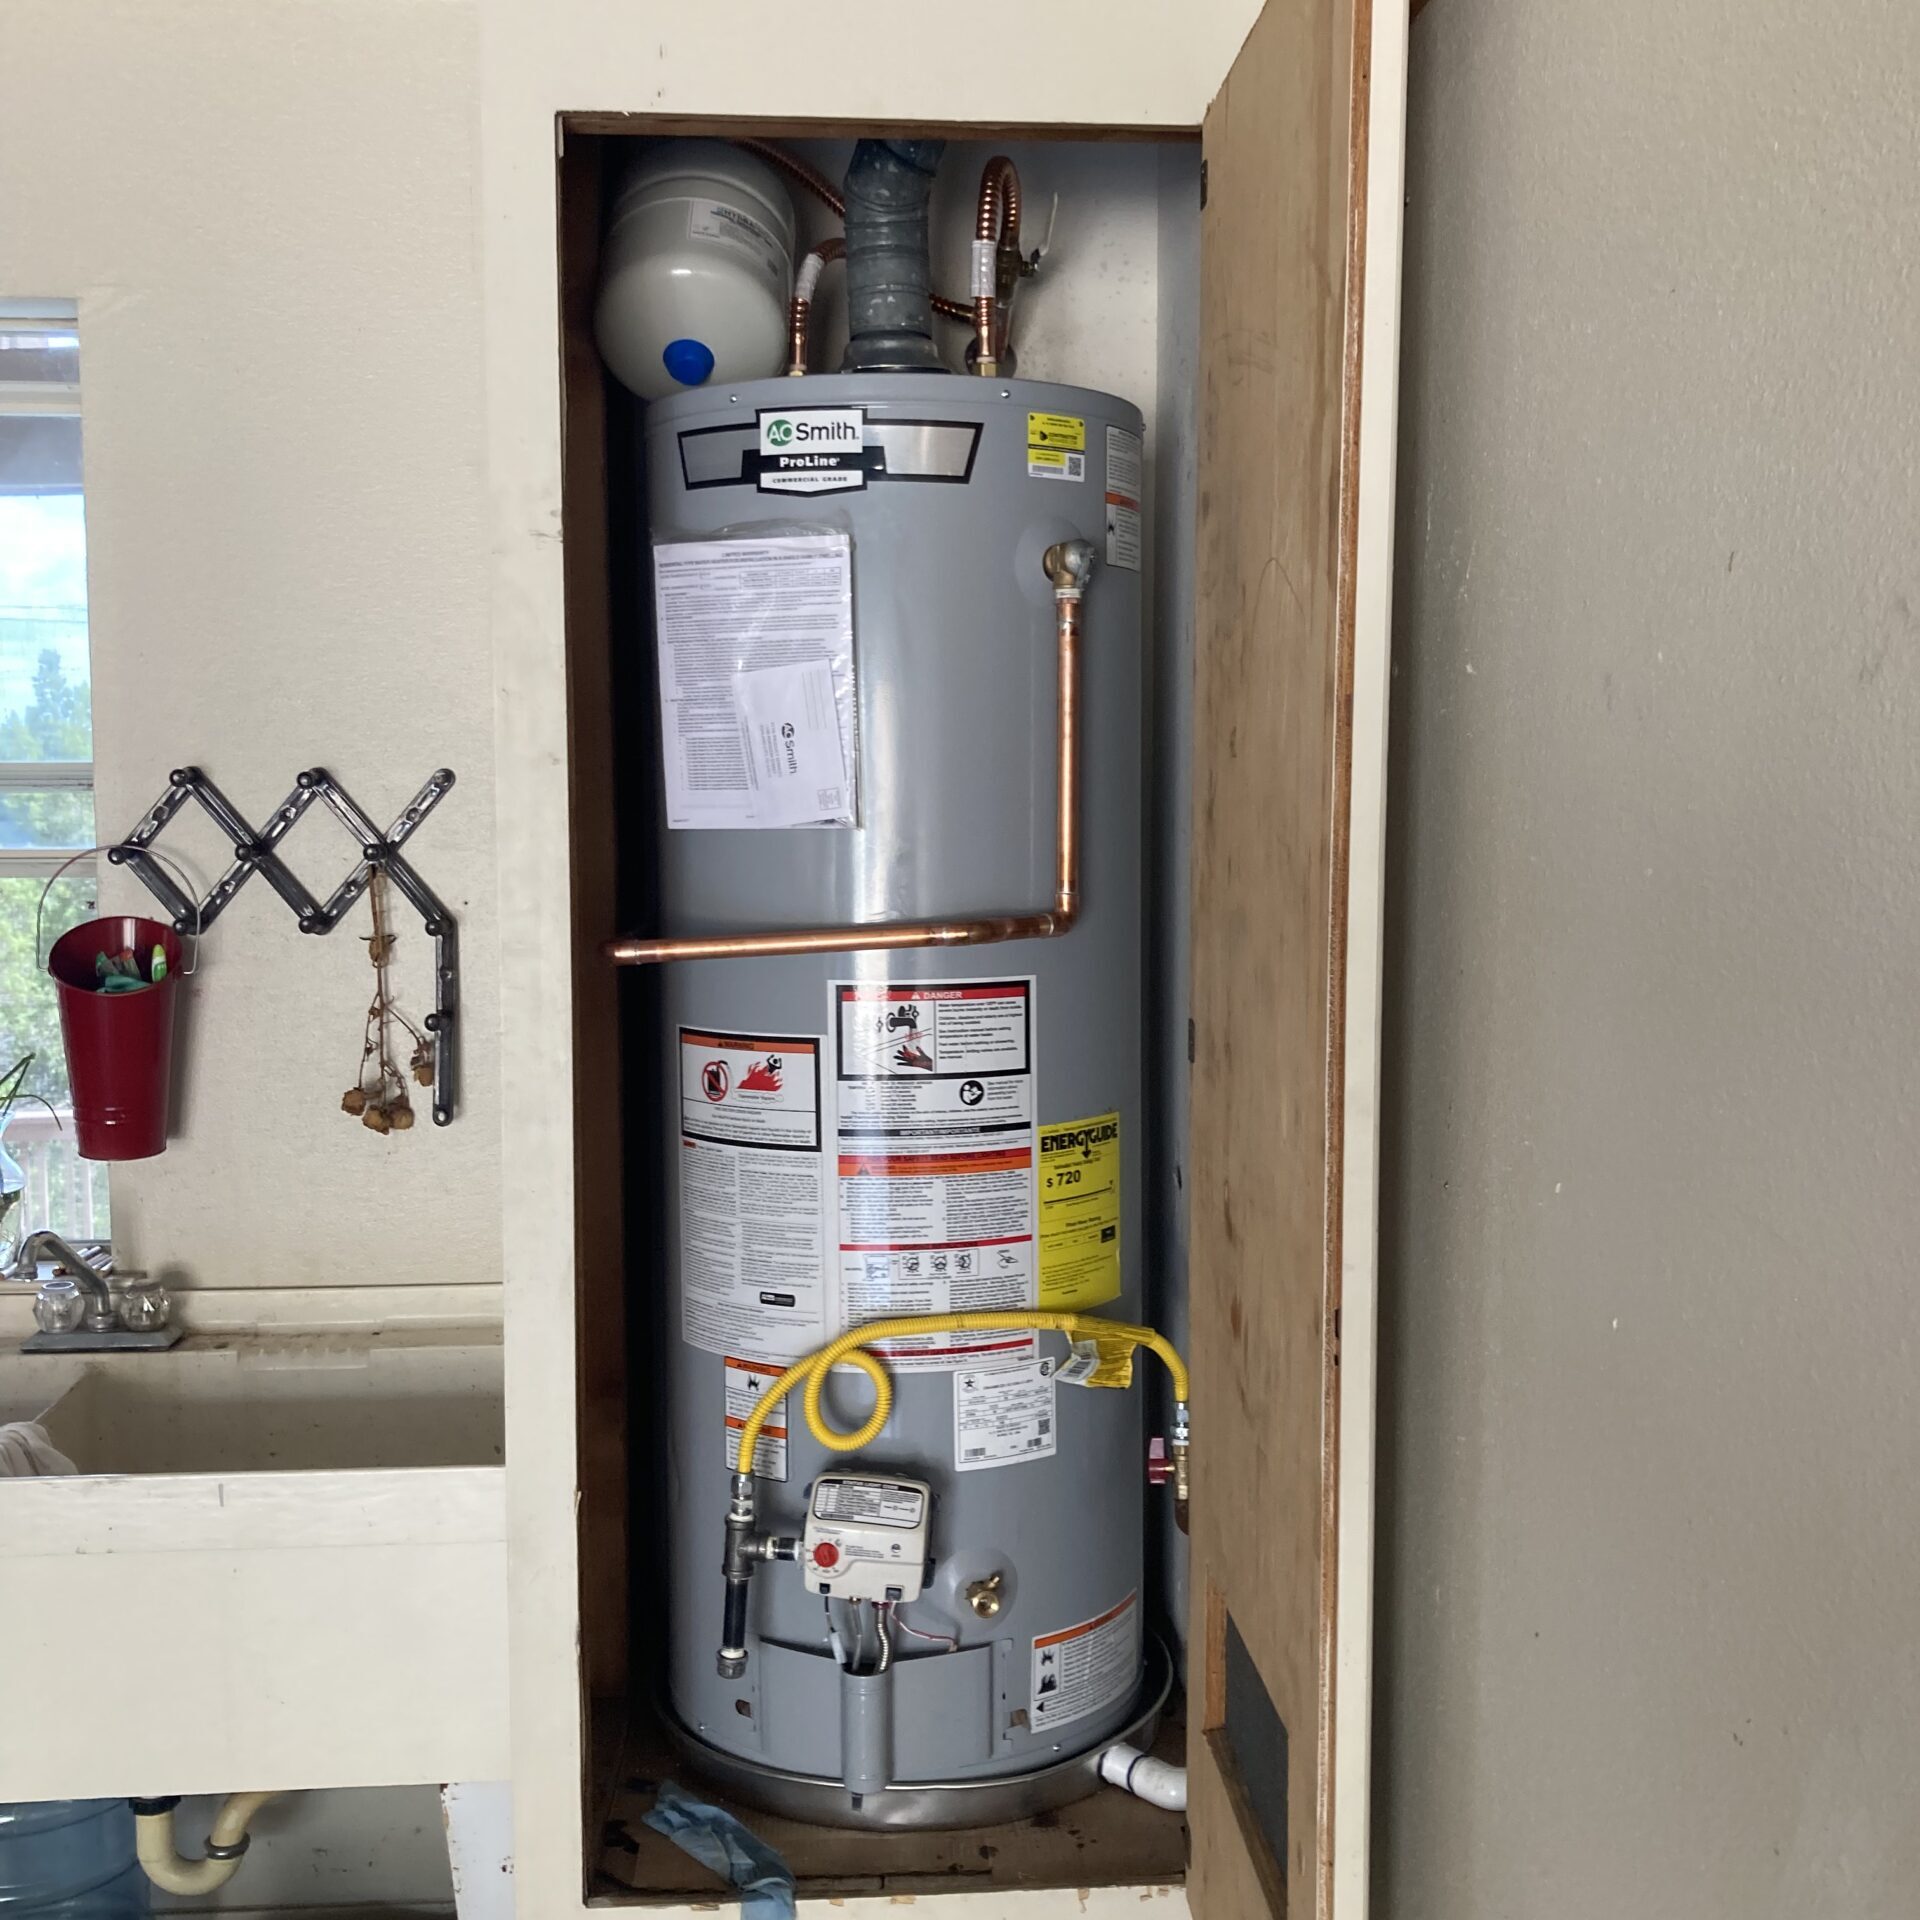 Conventional water heaters, Heat pumps...